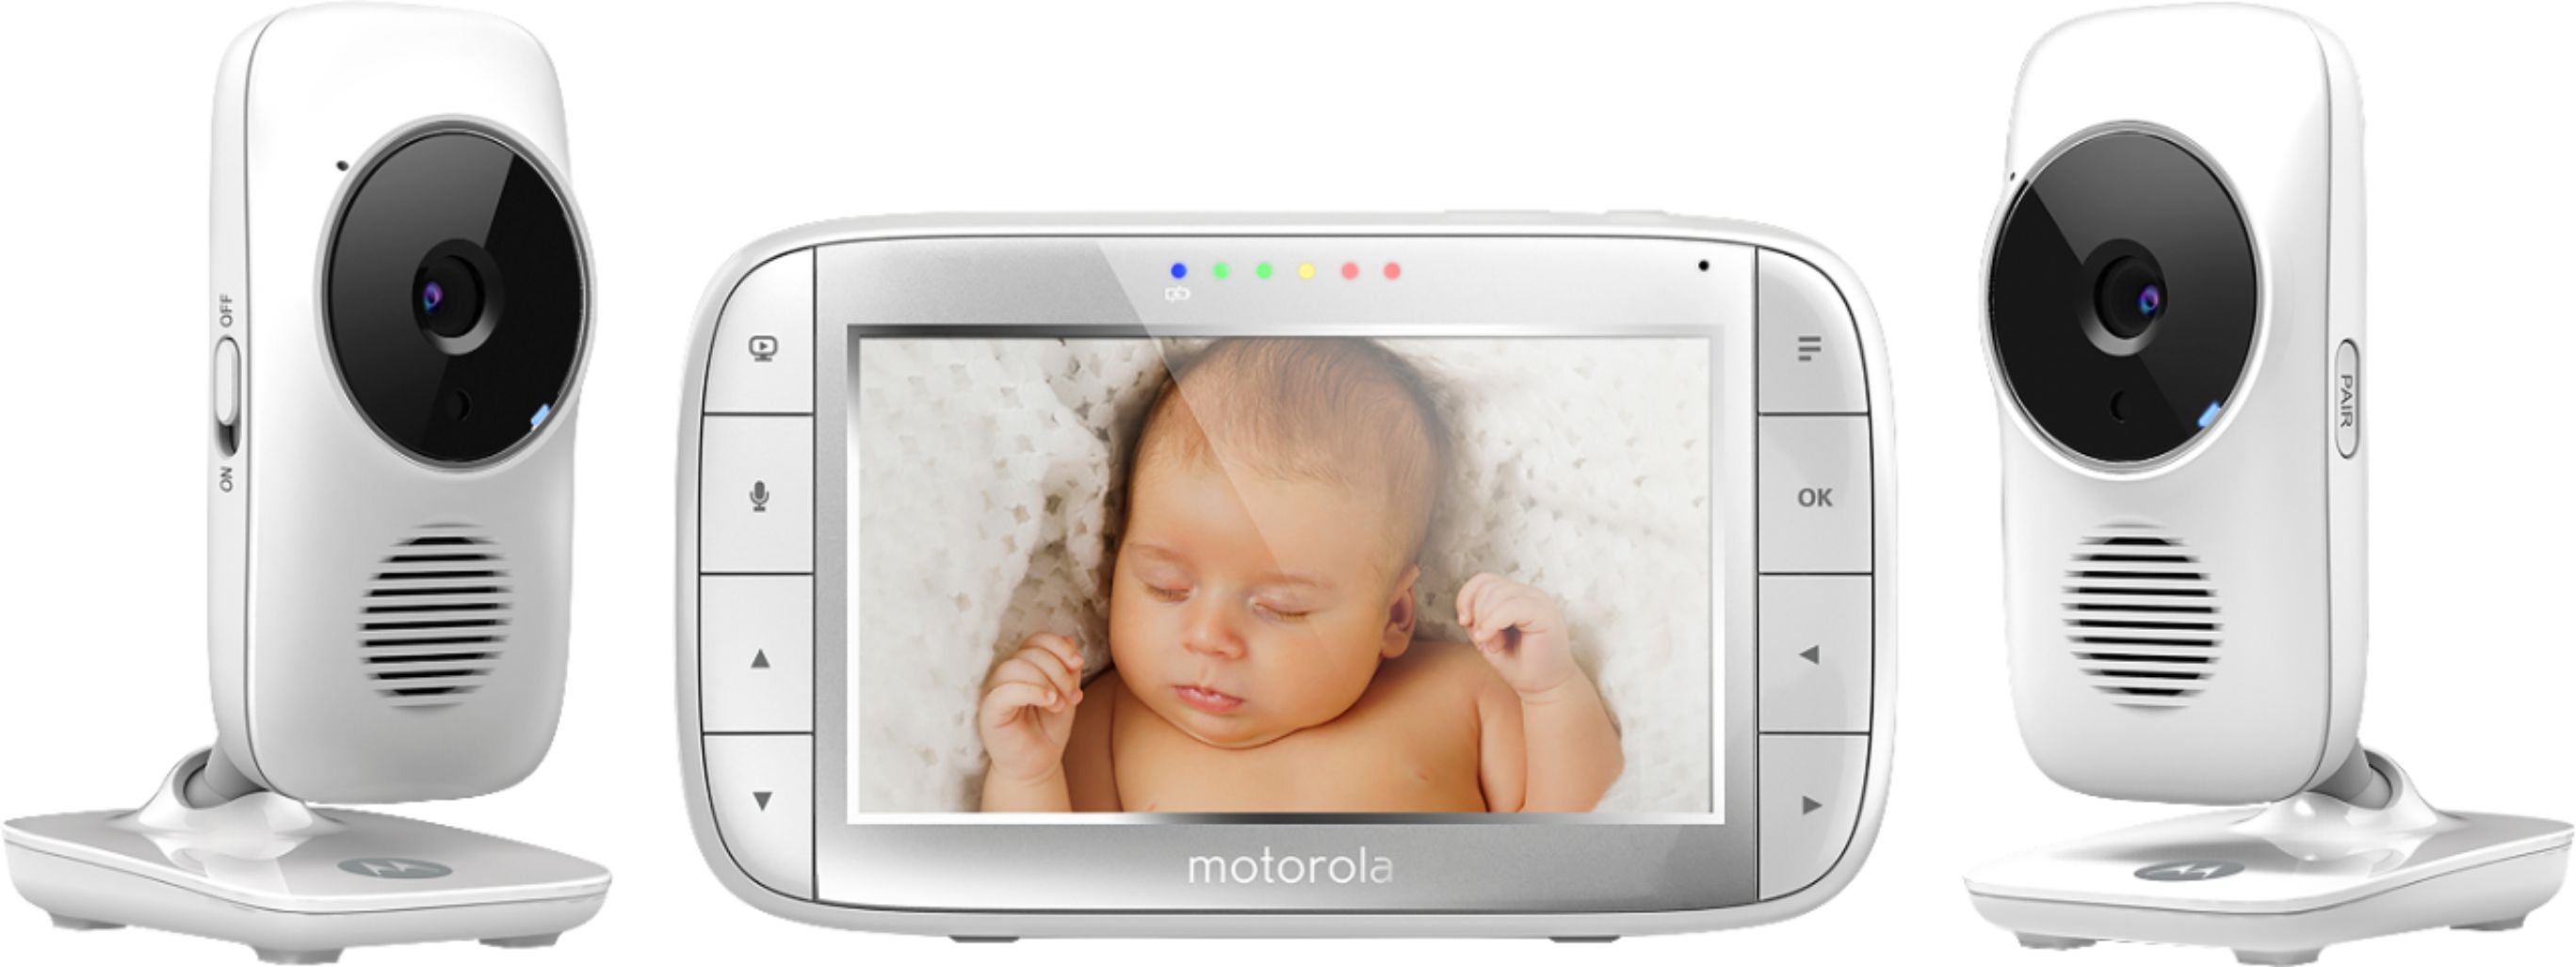 Motorola Video Baby Monitor With 2 2 4ghz Cameras And 5 Screen Mbp48 2 Best Buy